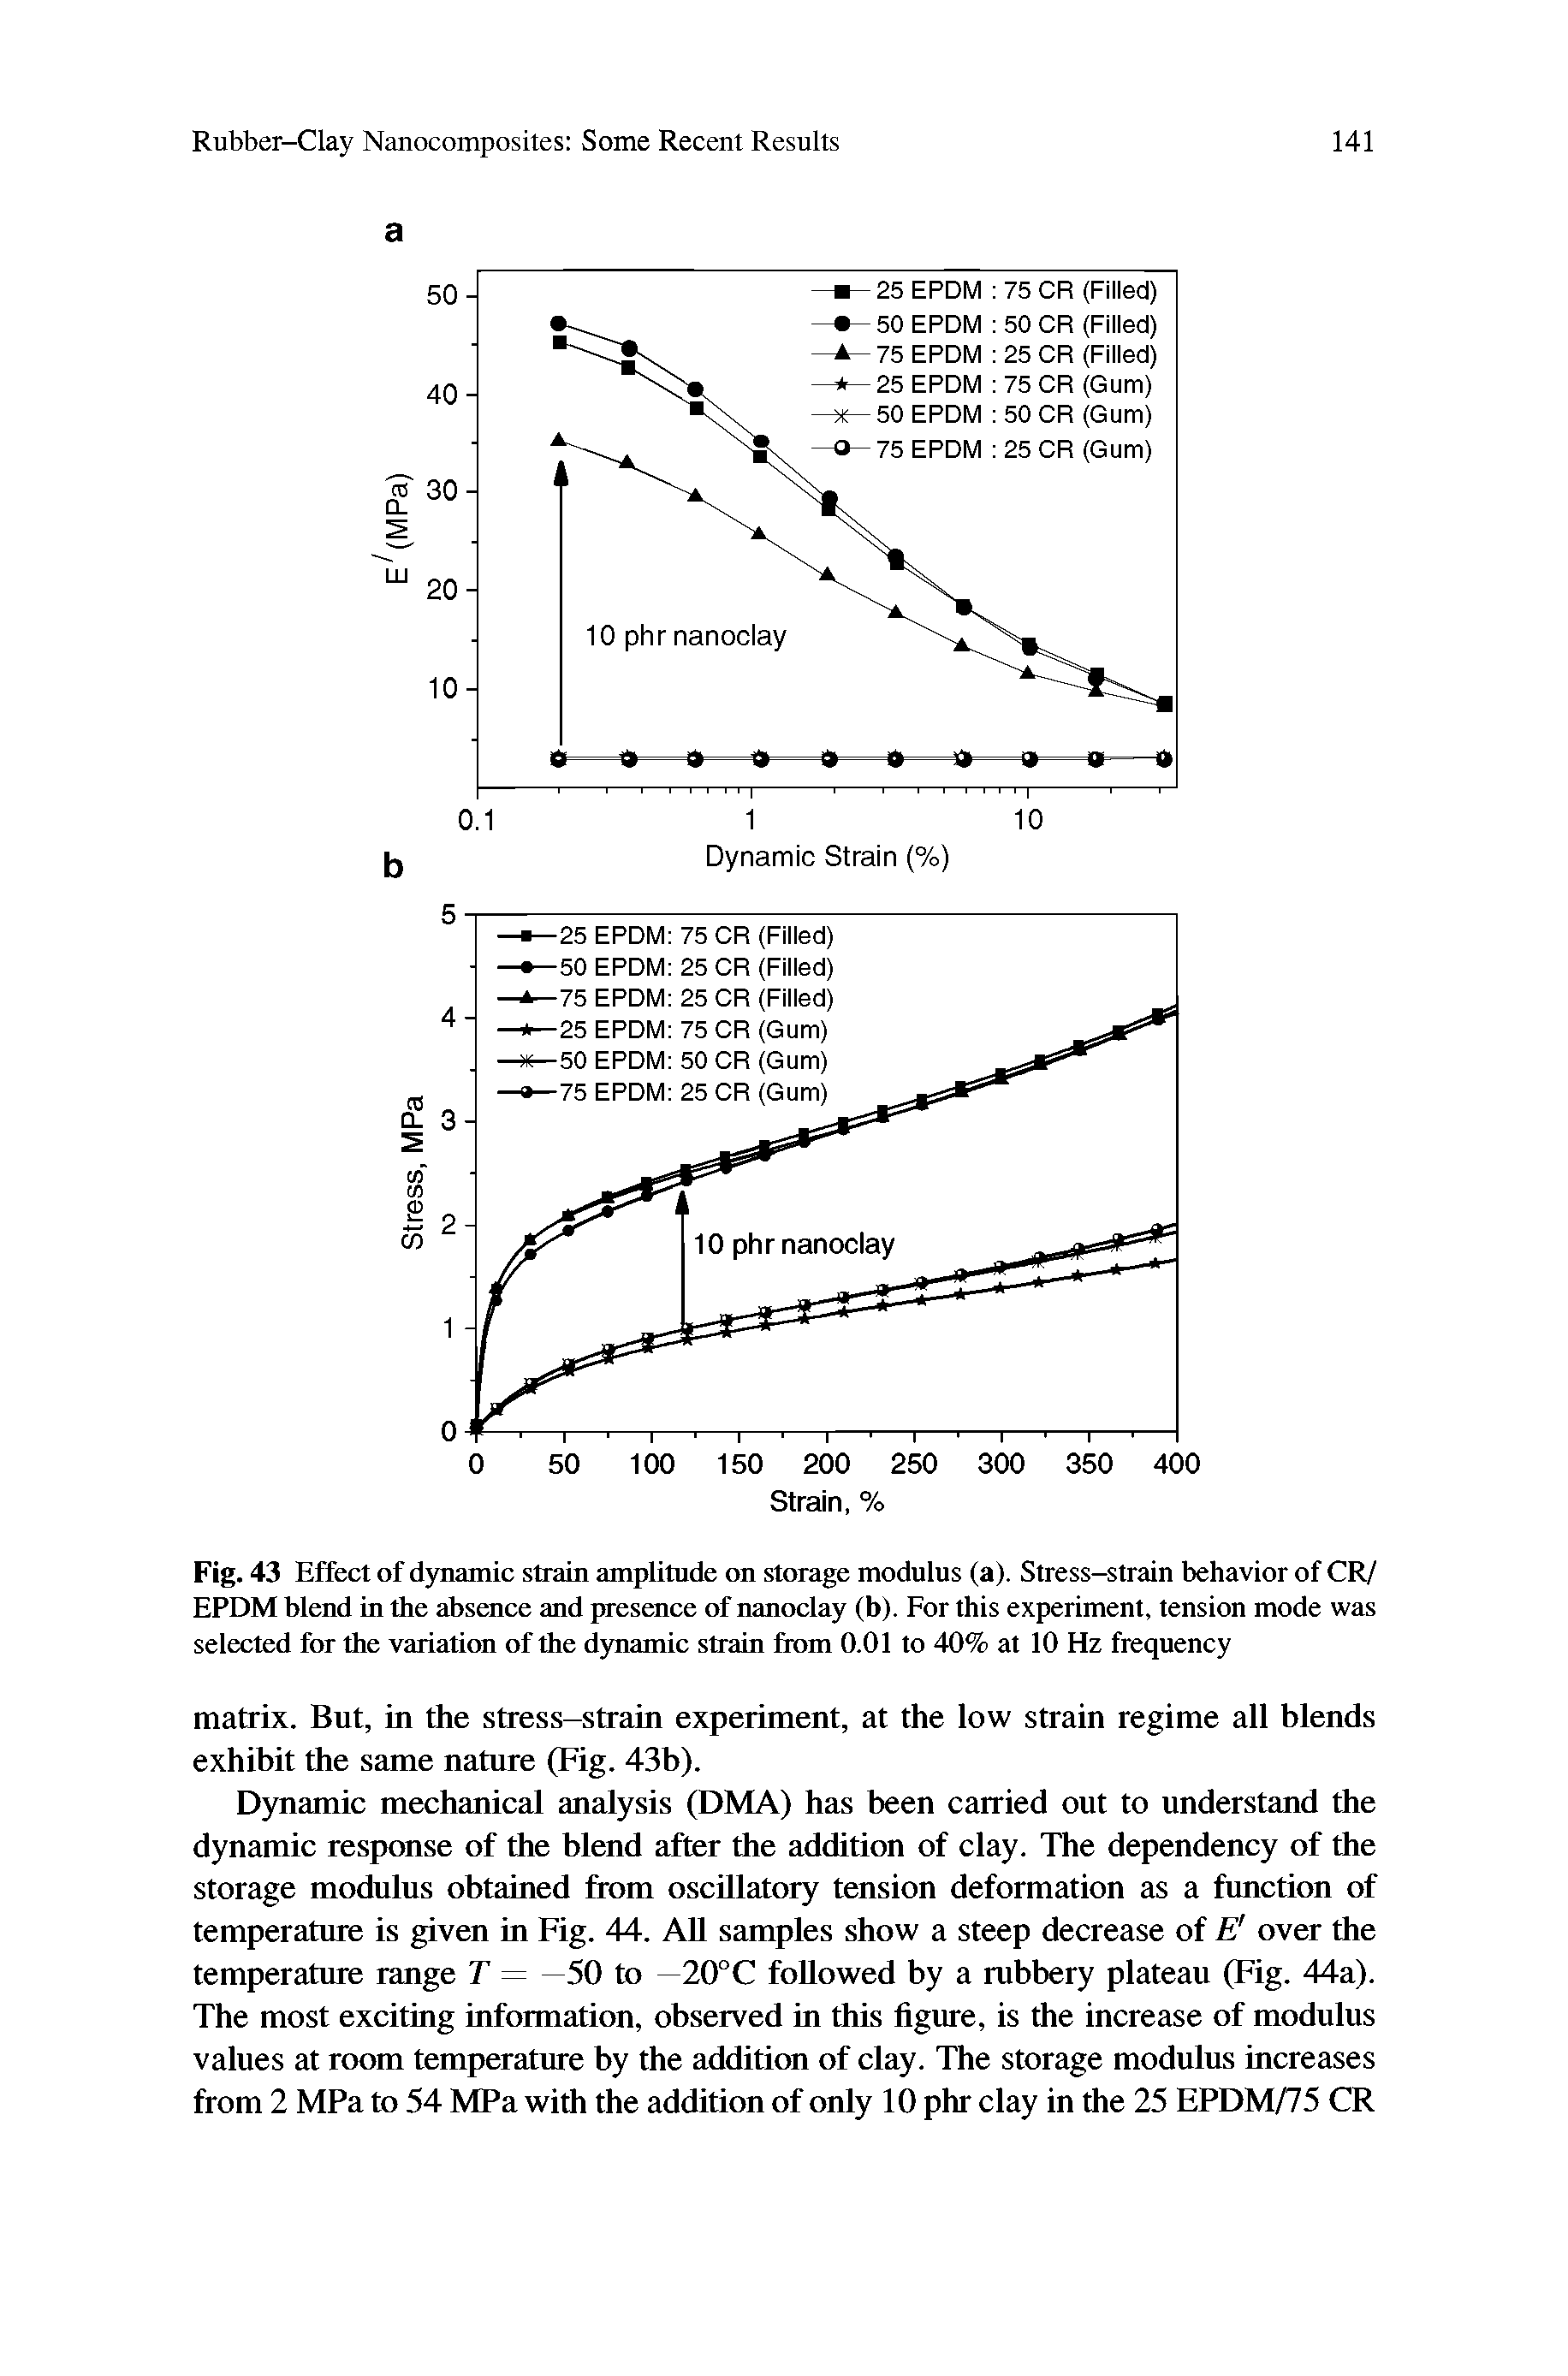 Fig. 43 Effect of dynamic strain amplitude on storage modulus (a). Stress-strain behavior of CR/ EPDM blend in the absence and presence of nanoclay (b). For this experiment, tension mode was selected for the variation of the dynamic strain from 0.01 to 40% at 10 Hz frequency...